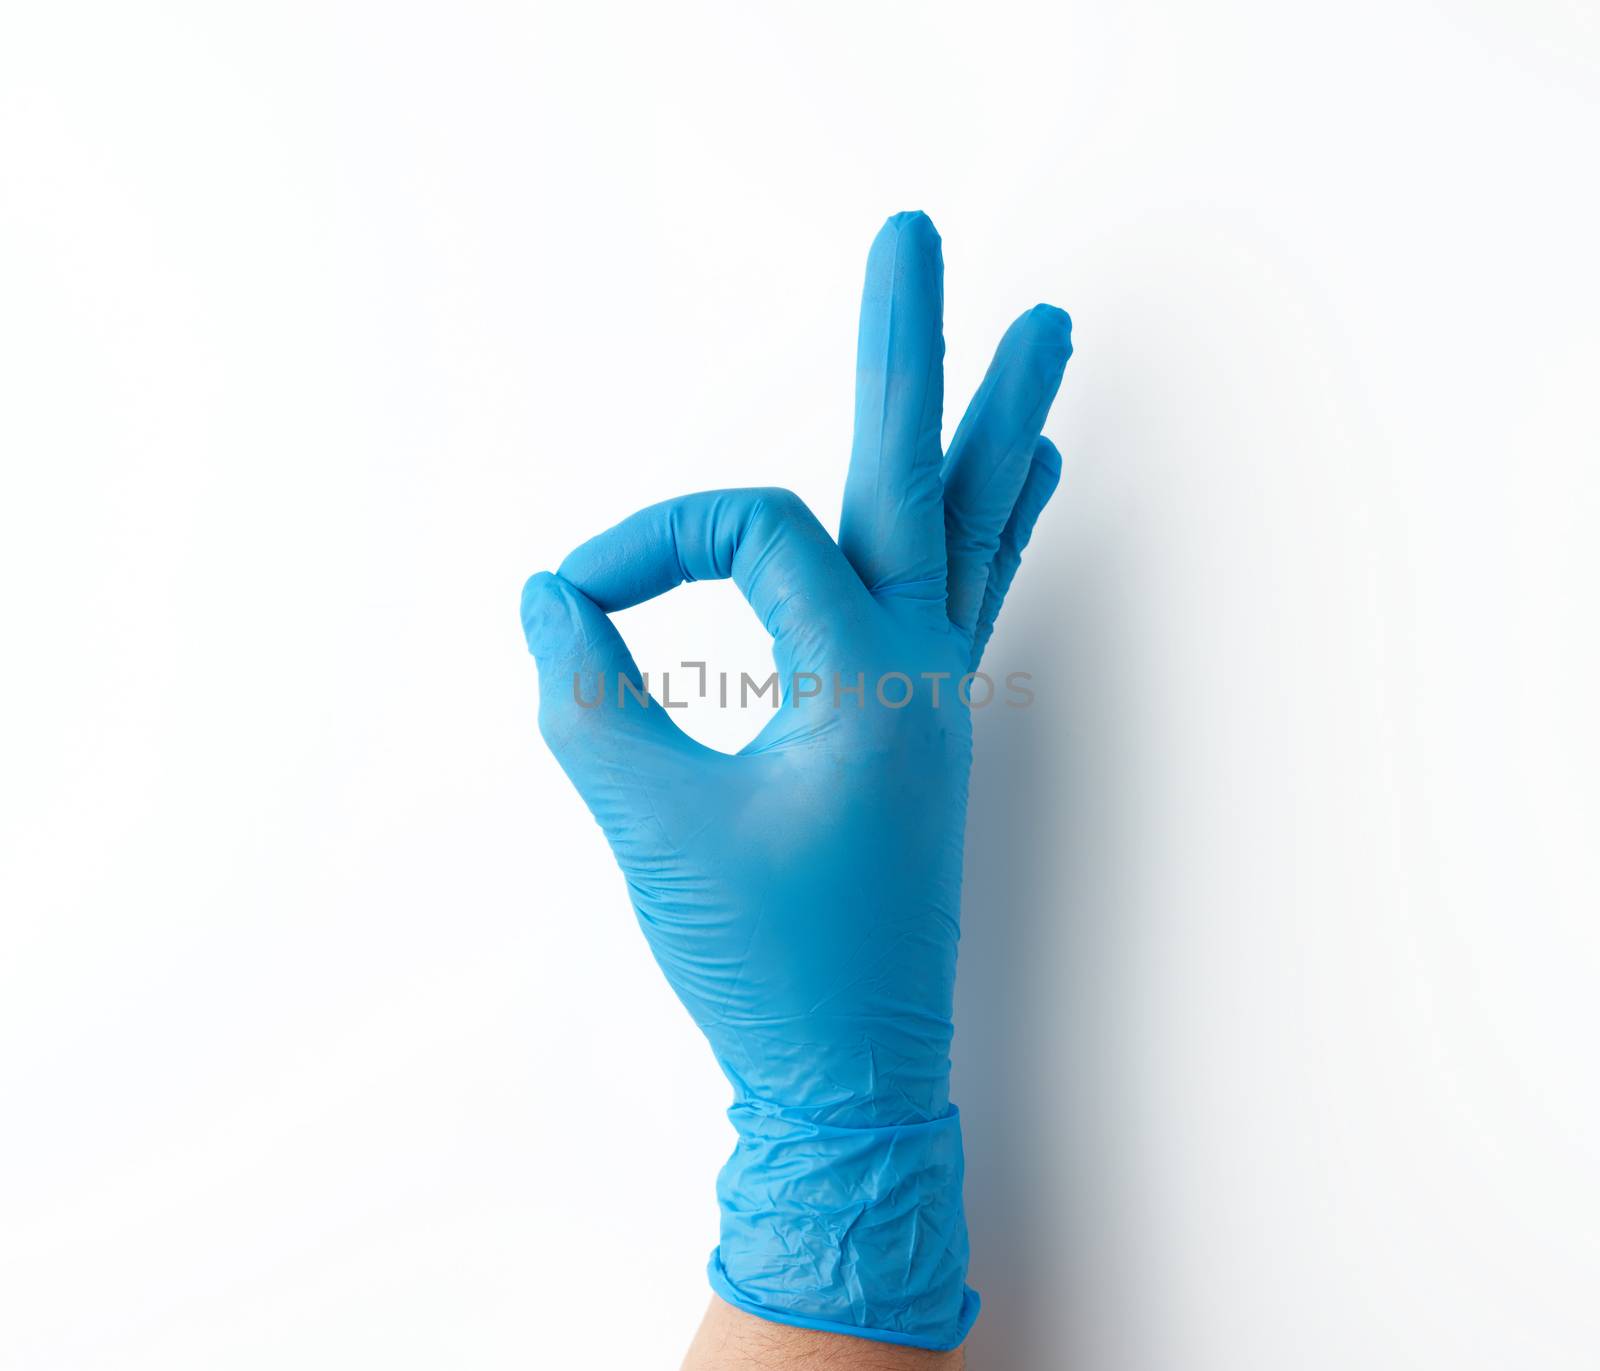 hand in blue medical glove shows ok gesture, white background, approval concept